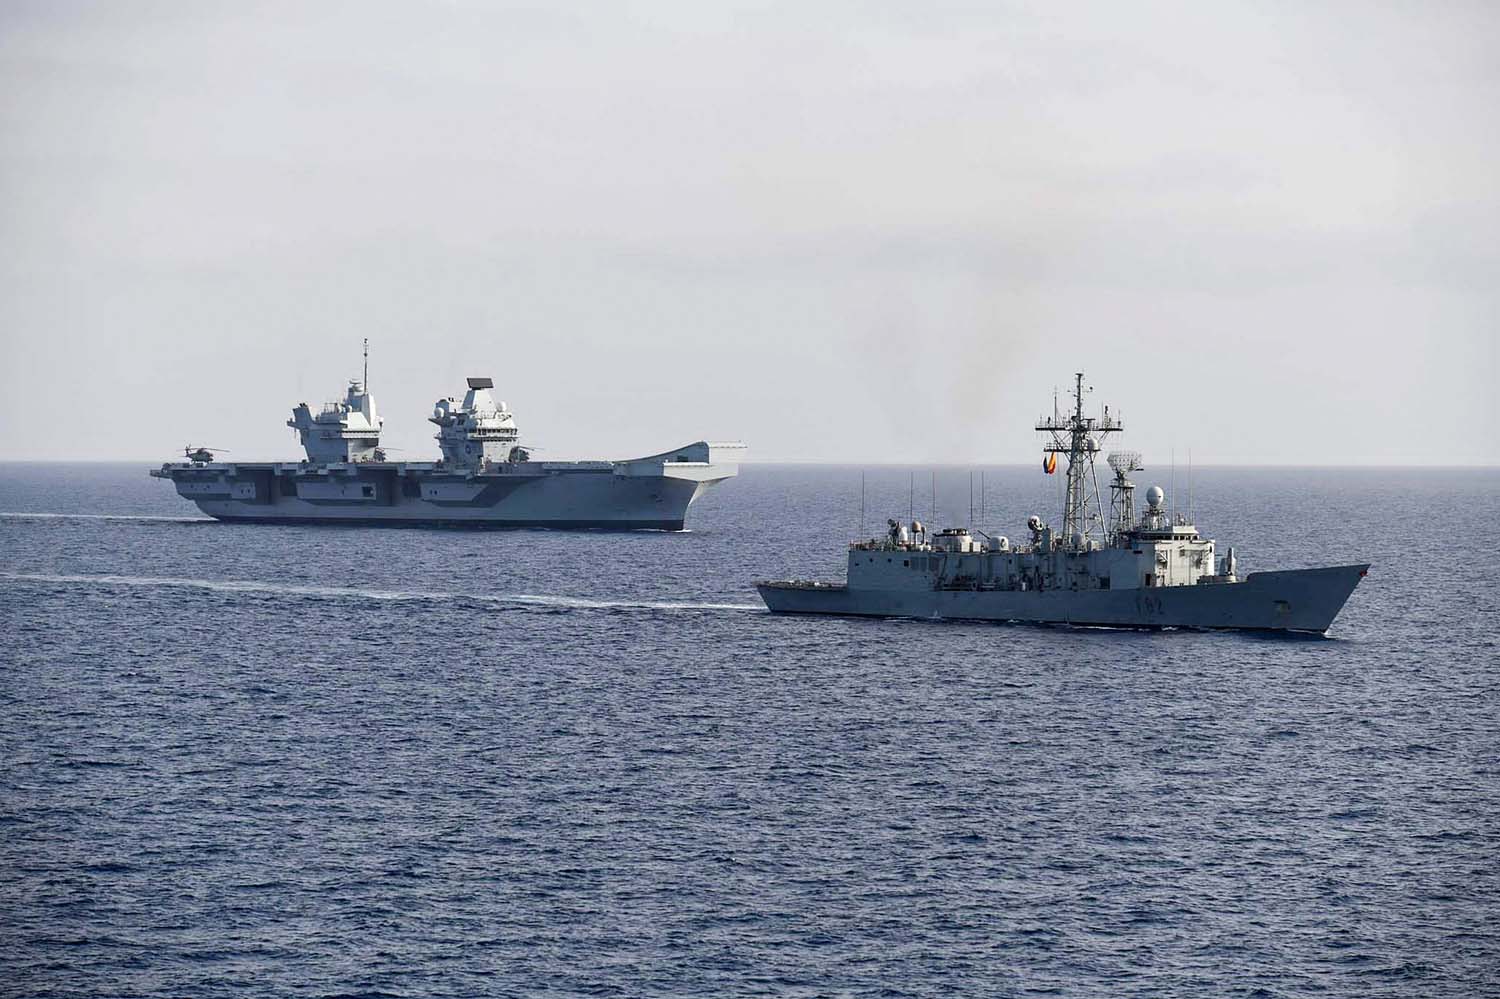 HMS Prince of Wales returns from Spain after completing NATO mission